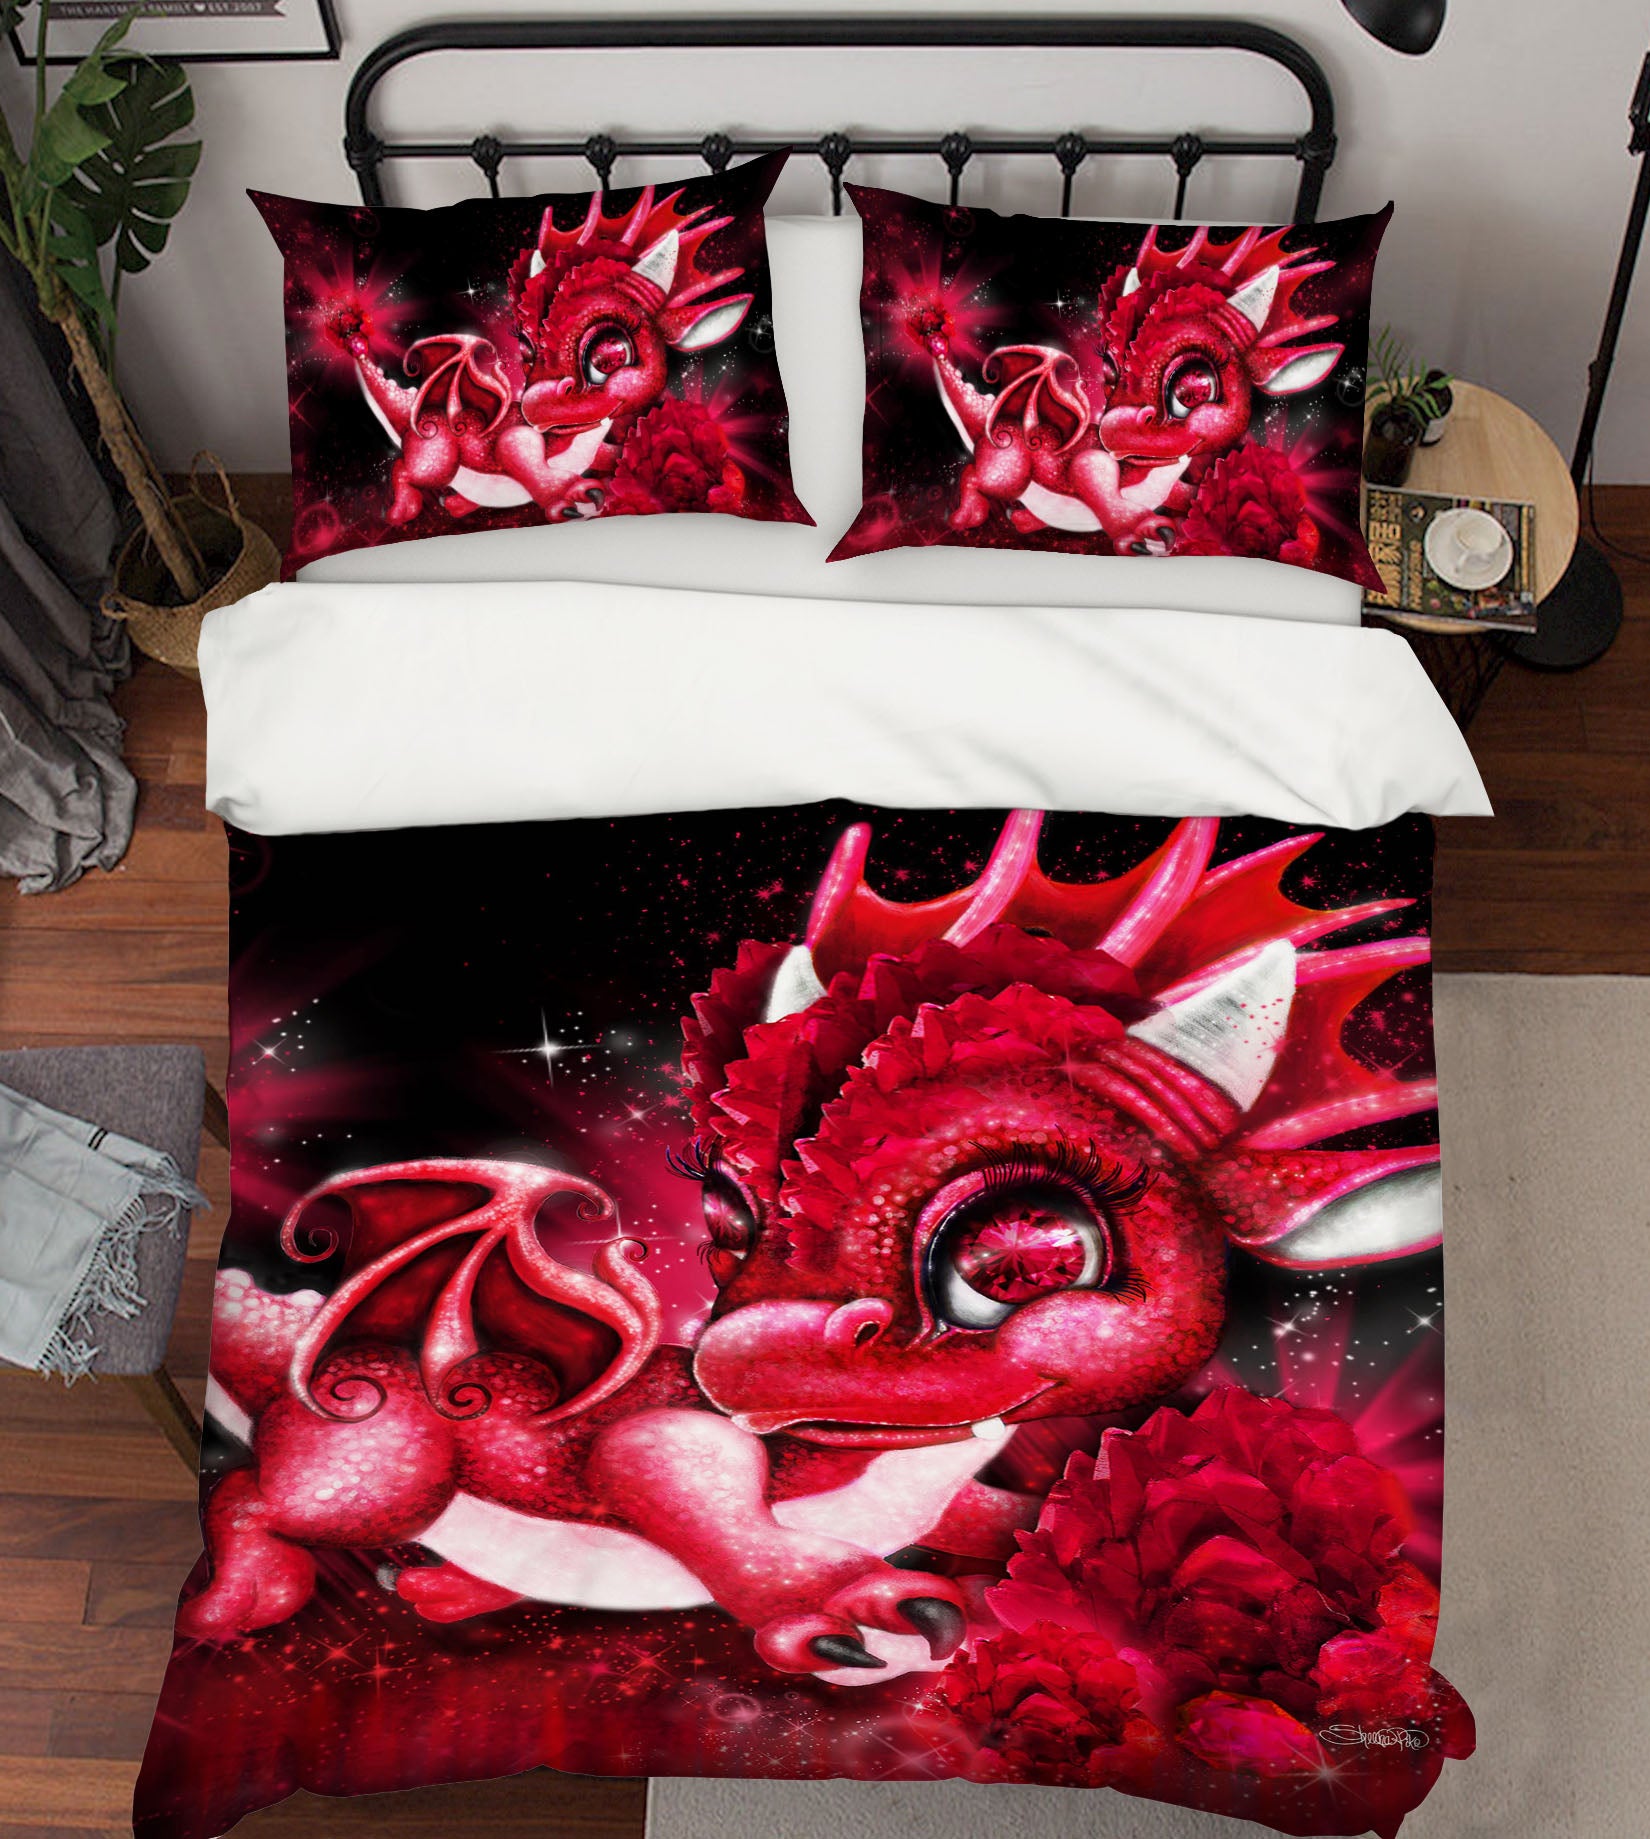 3D Cute Red Dragon 8558 Sheena Pike Bedding Bed Pillowcases Quilt Cover Duvet Cover